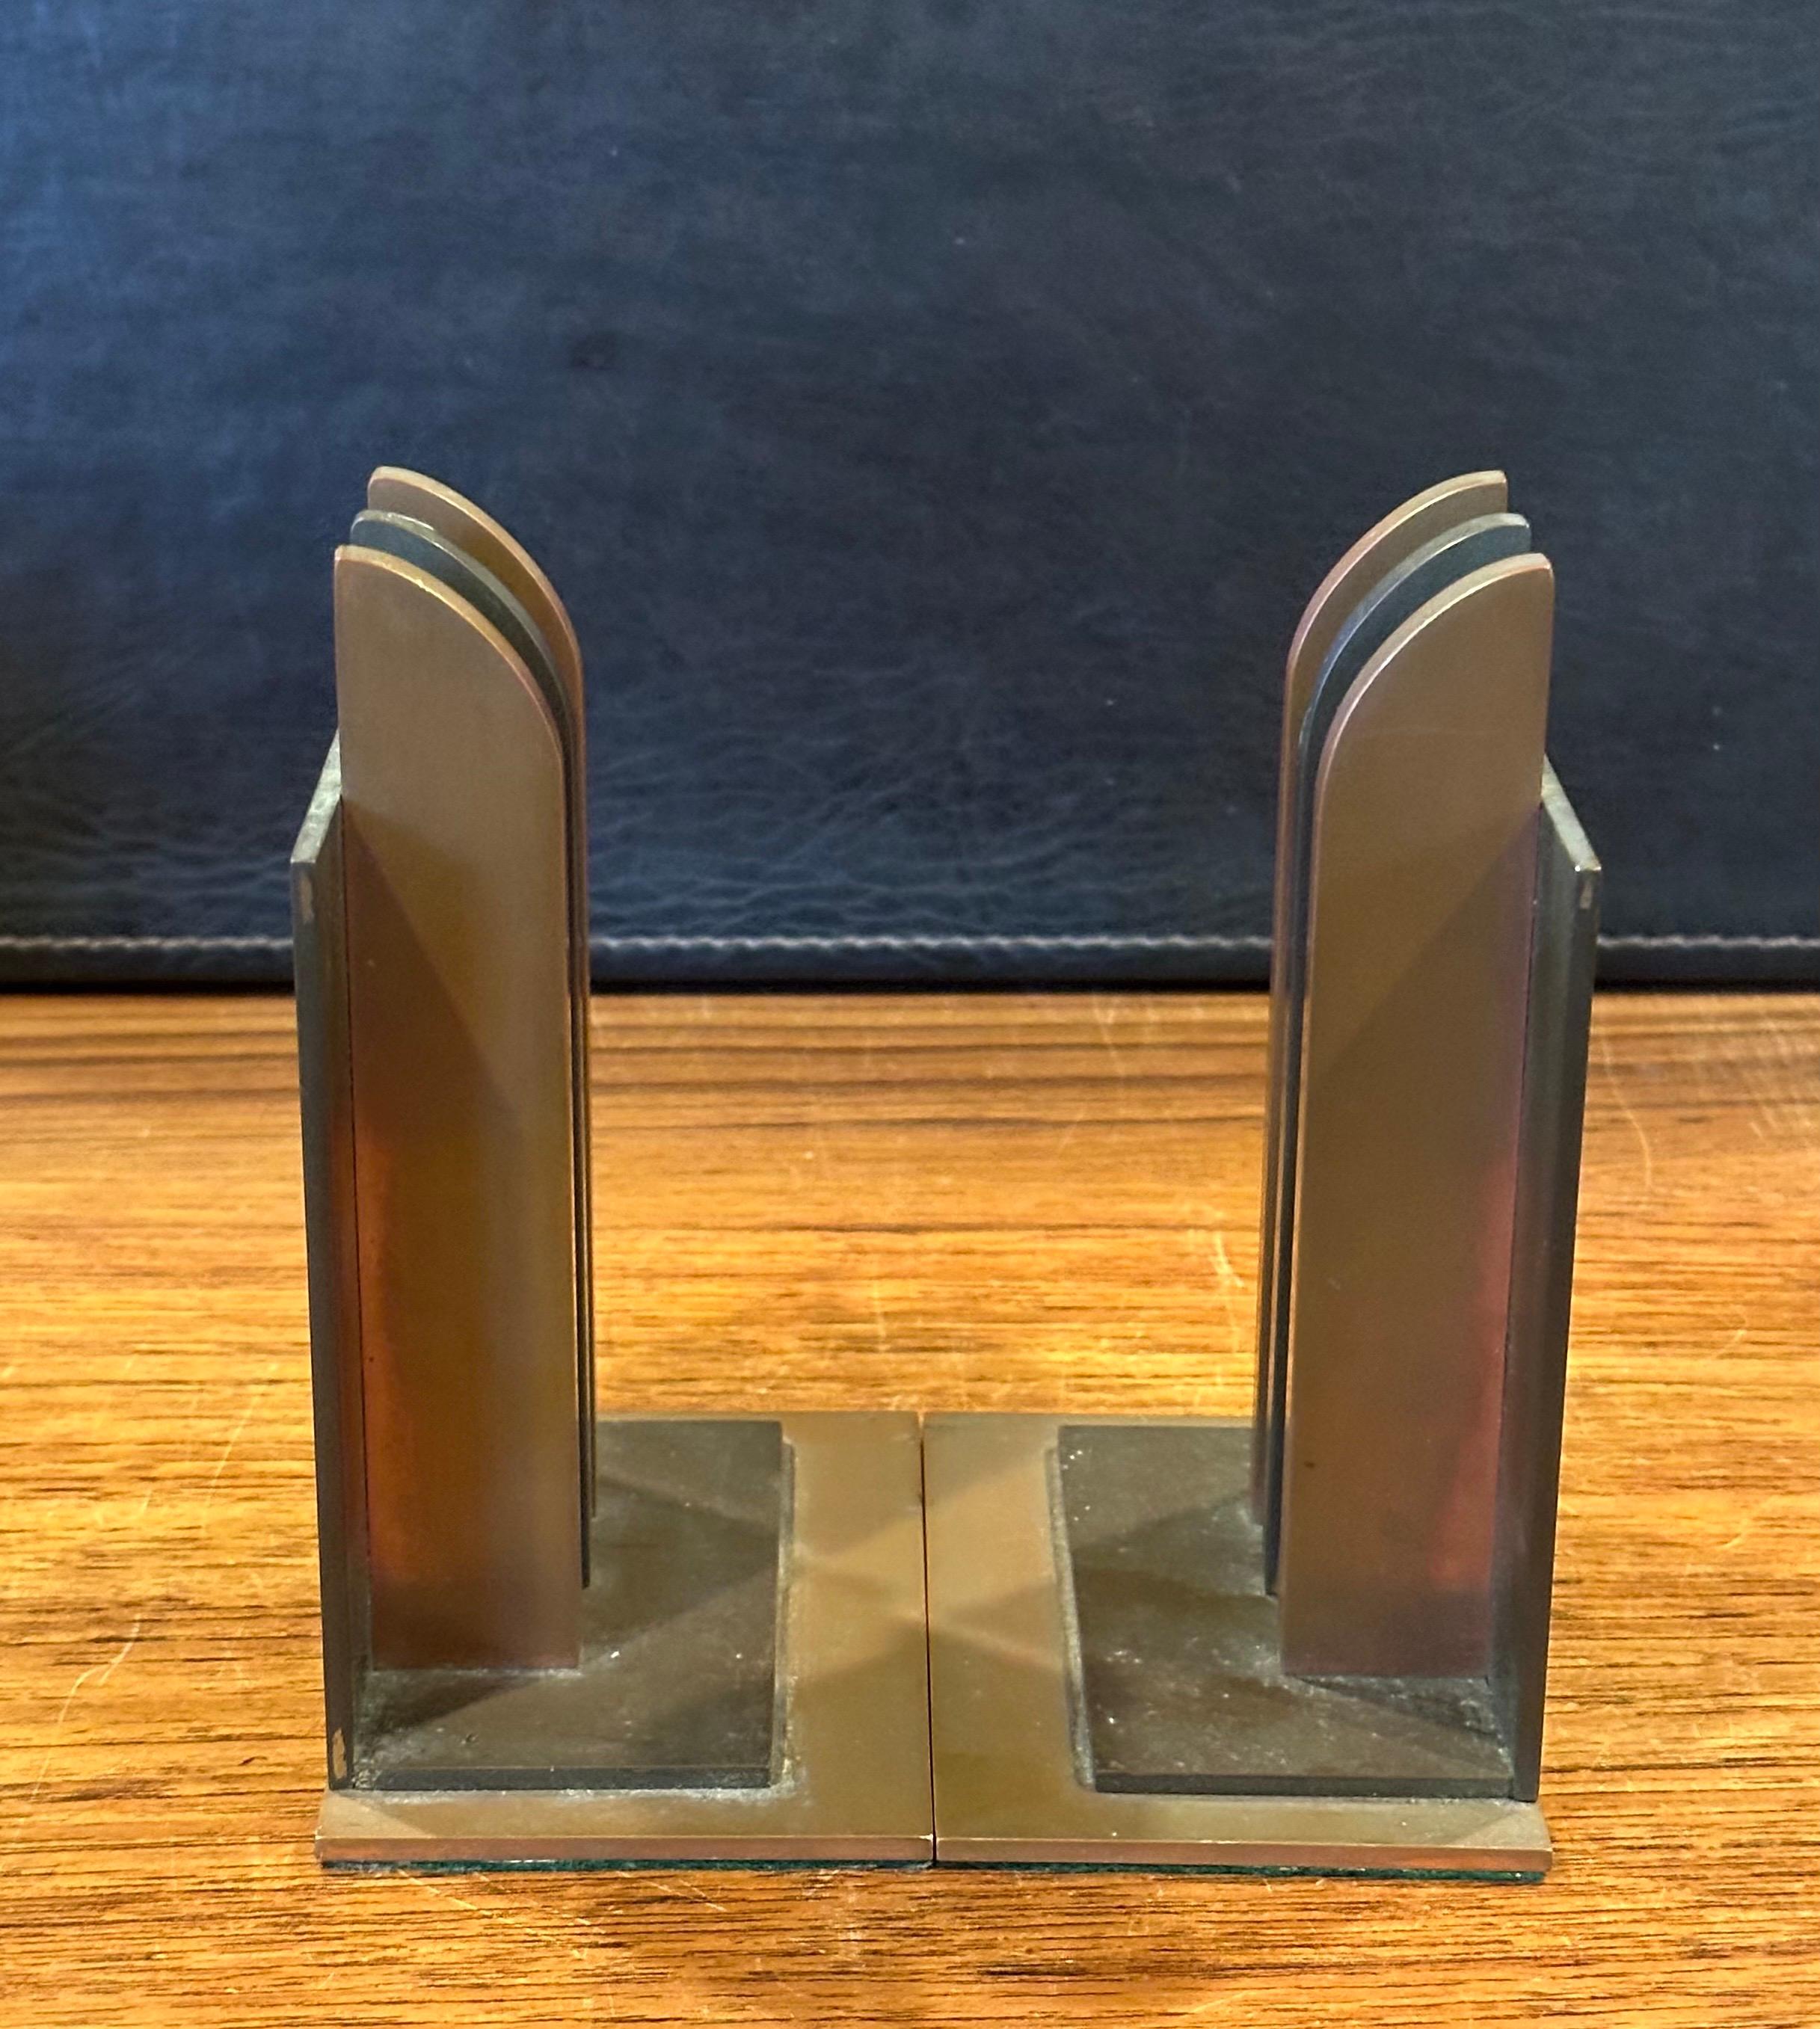 Pair of Machine Age Art Deco Bookends by Walter Von Nessen for Chase & Co For Sale 4